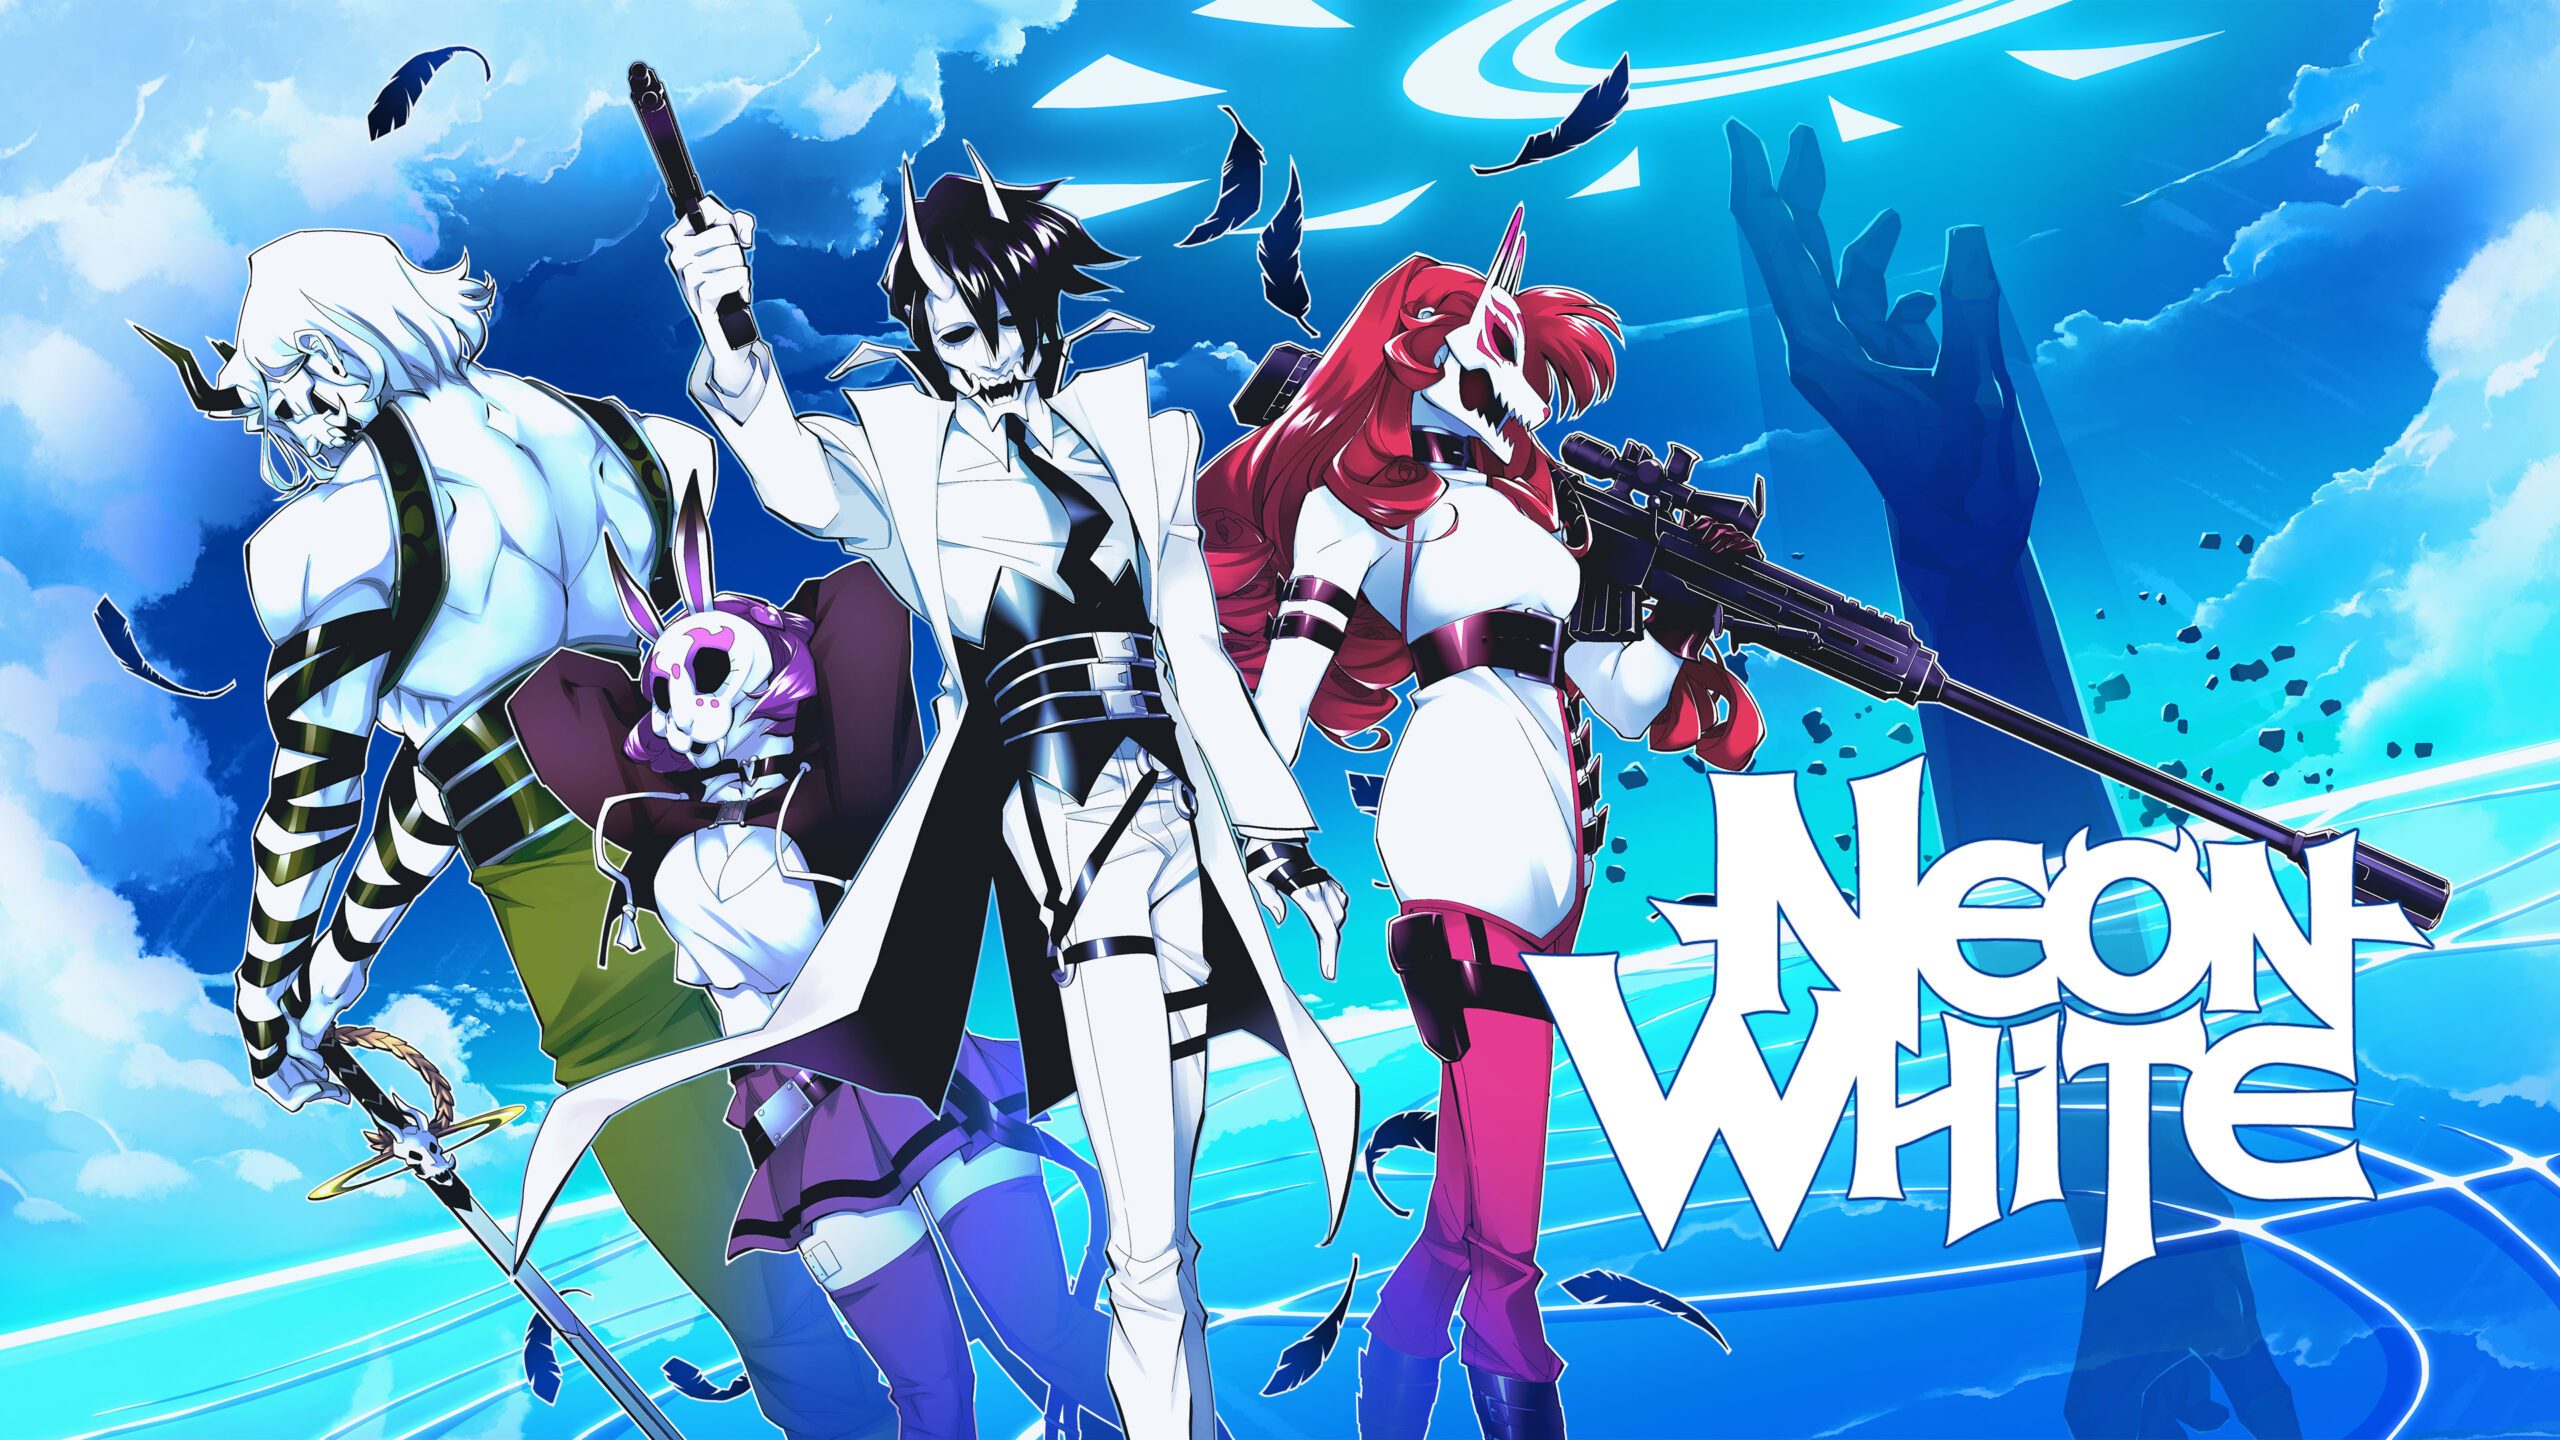 Neon White is coming to PS4 and PS5 December 13 – PlayStation.Blog